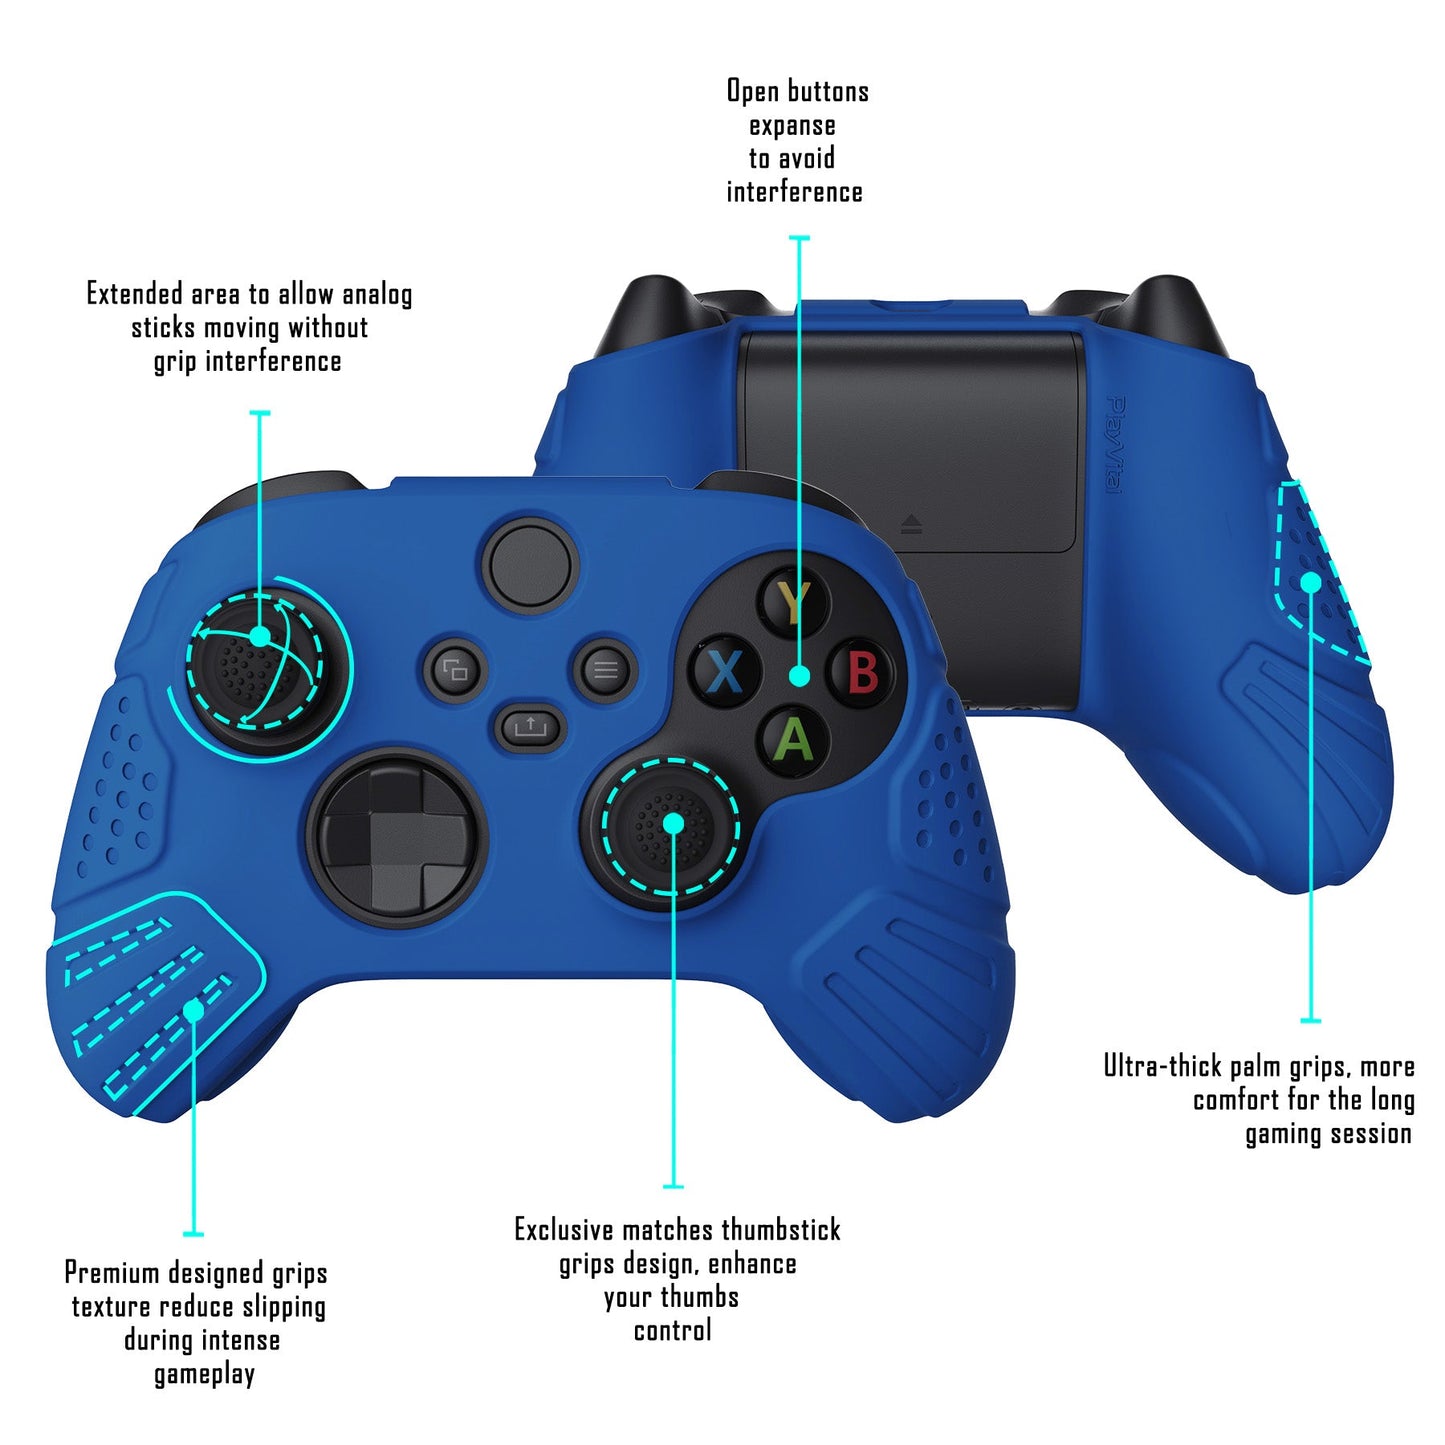 PlayVital Guardian Edition Blue Ergonomic Soft Anti-slip Controller Silicone Case Cover, Rubber Protector Skins with Black Joystick Caps for Xbox Series S and Xbox Series X Controller - HCX3008 PlayVital